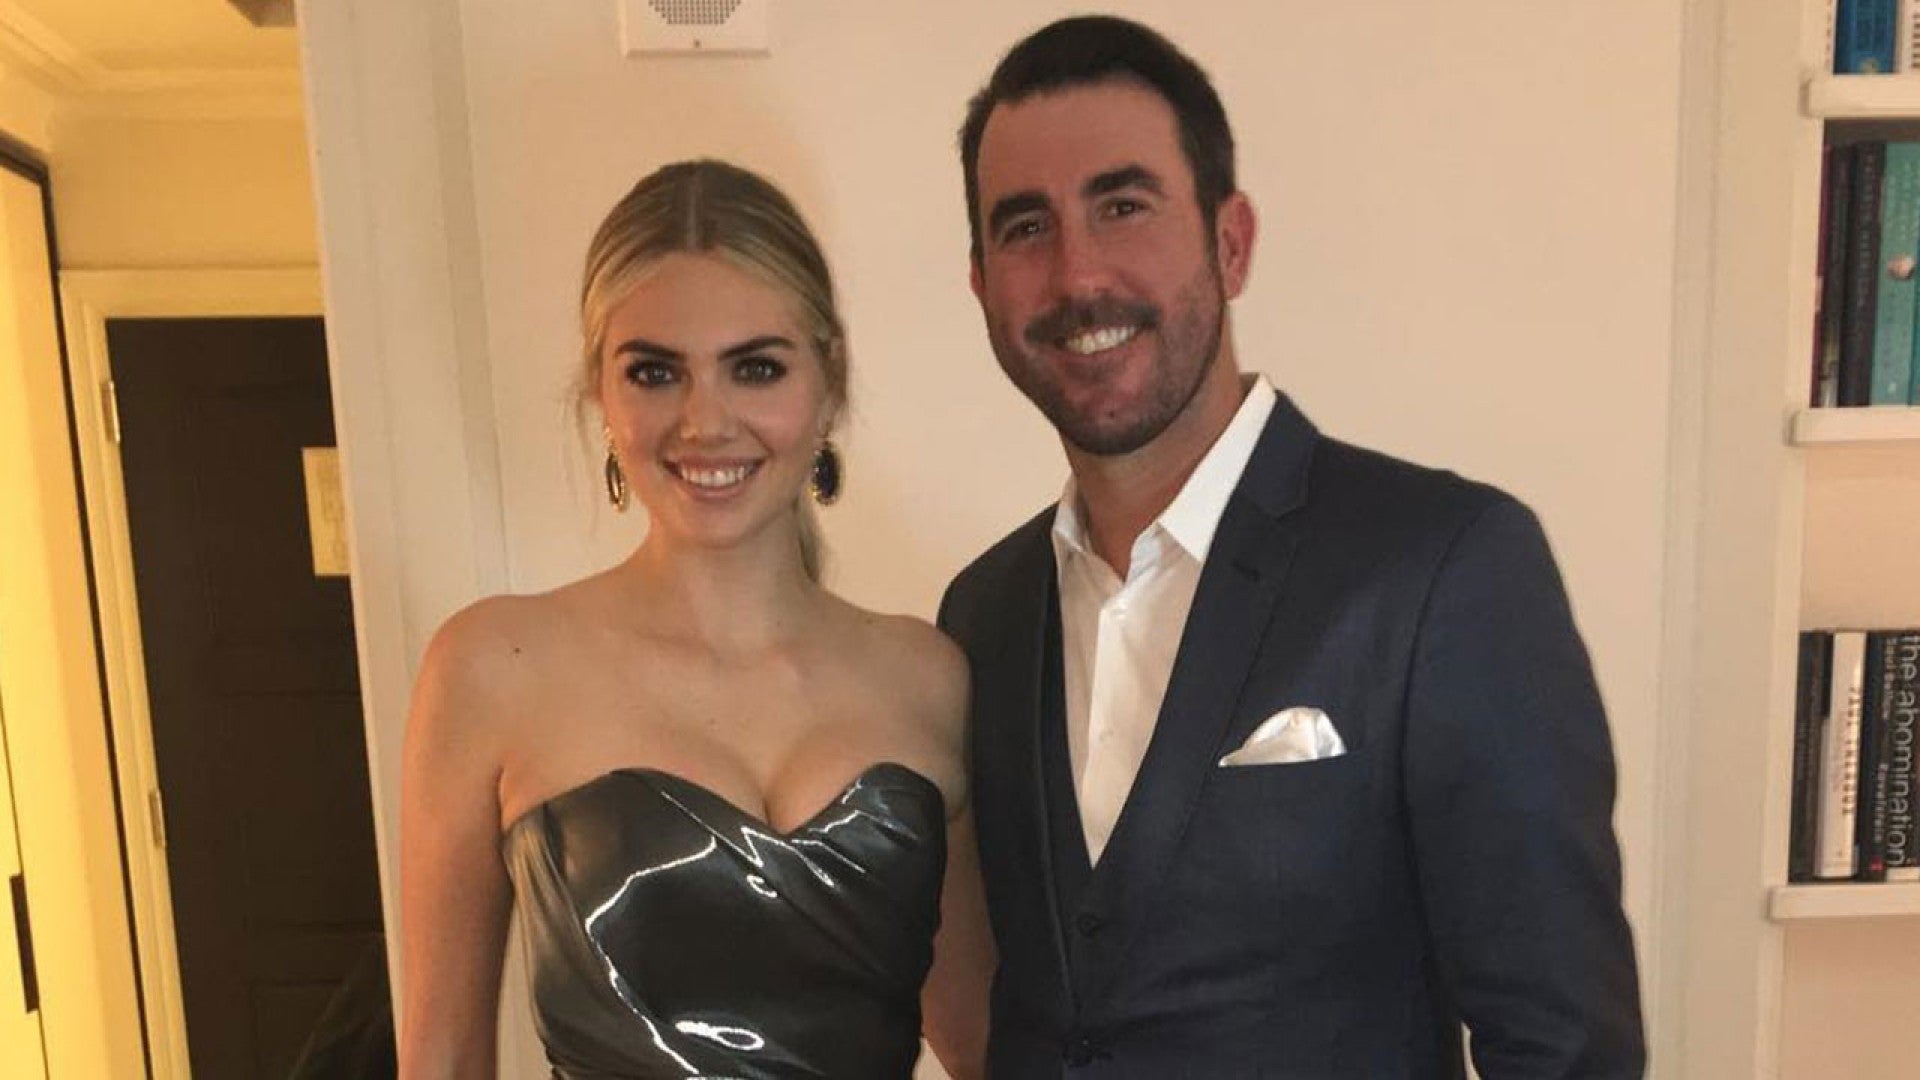 Kate Upton and Justin Verlander Reveal They Missed Their Wedding